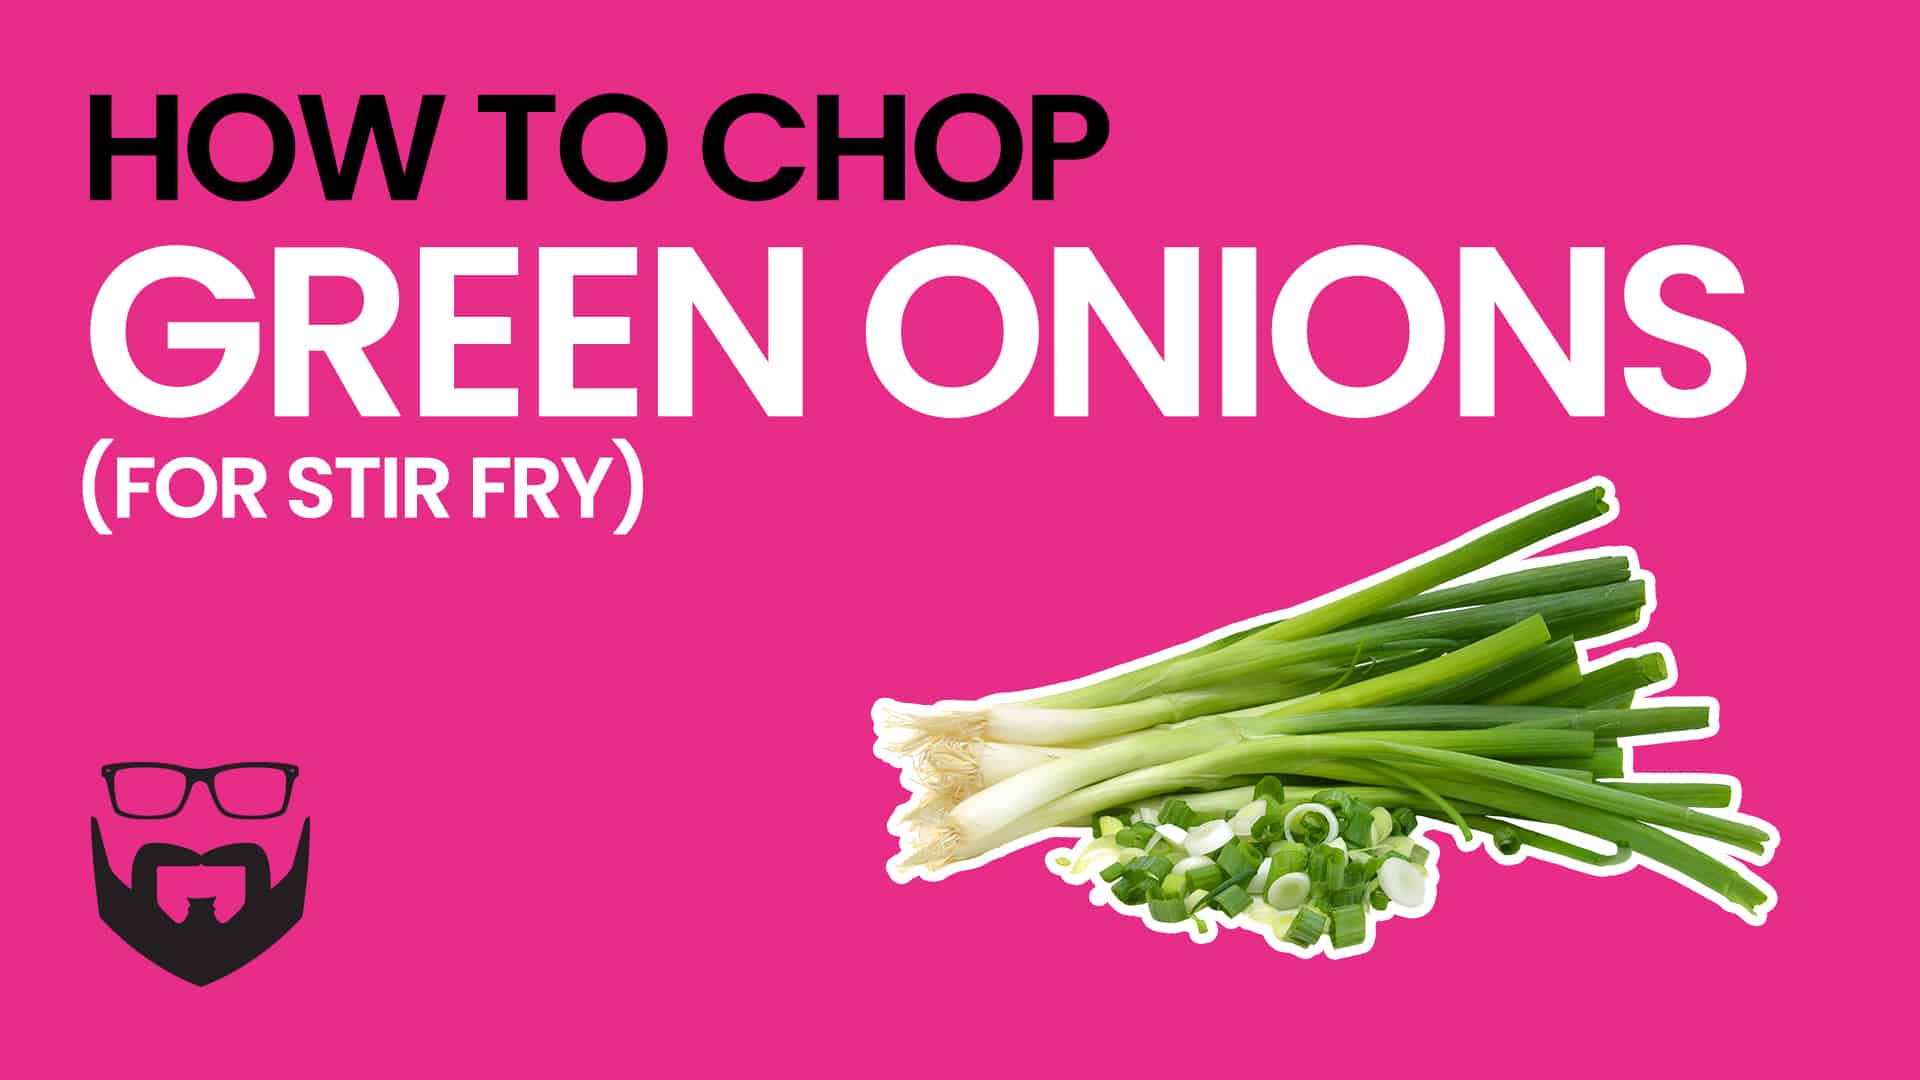 How to Chop Green Onions (for Stir Fry) Video - Pink